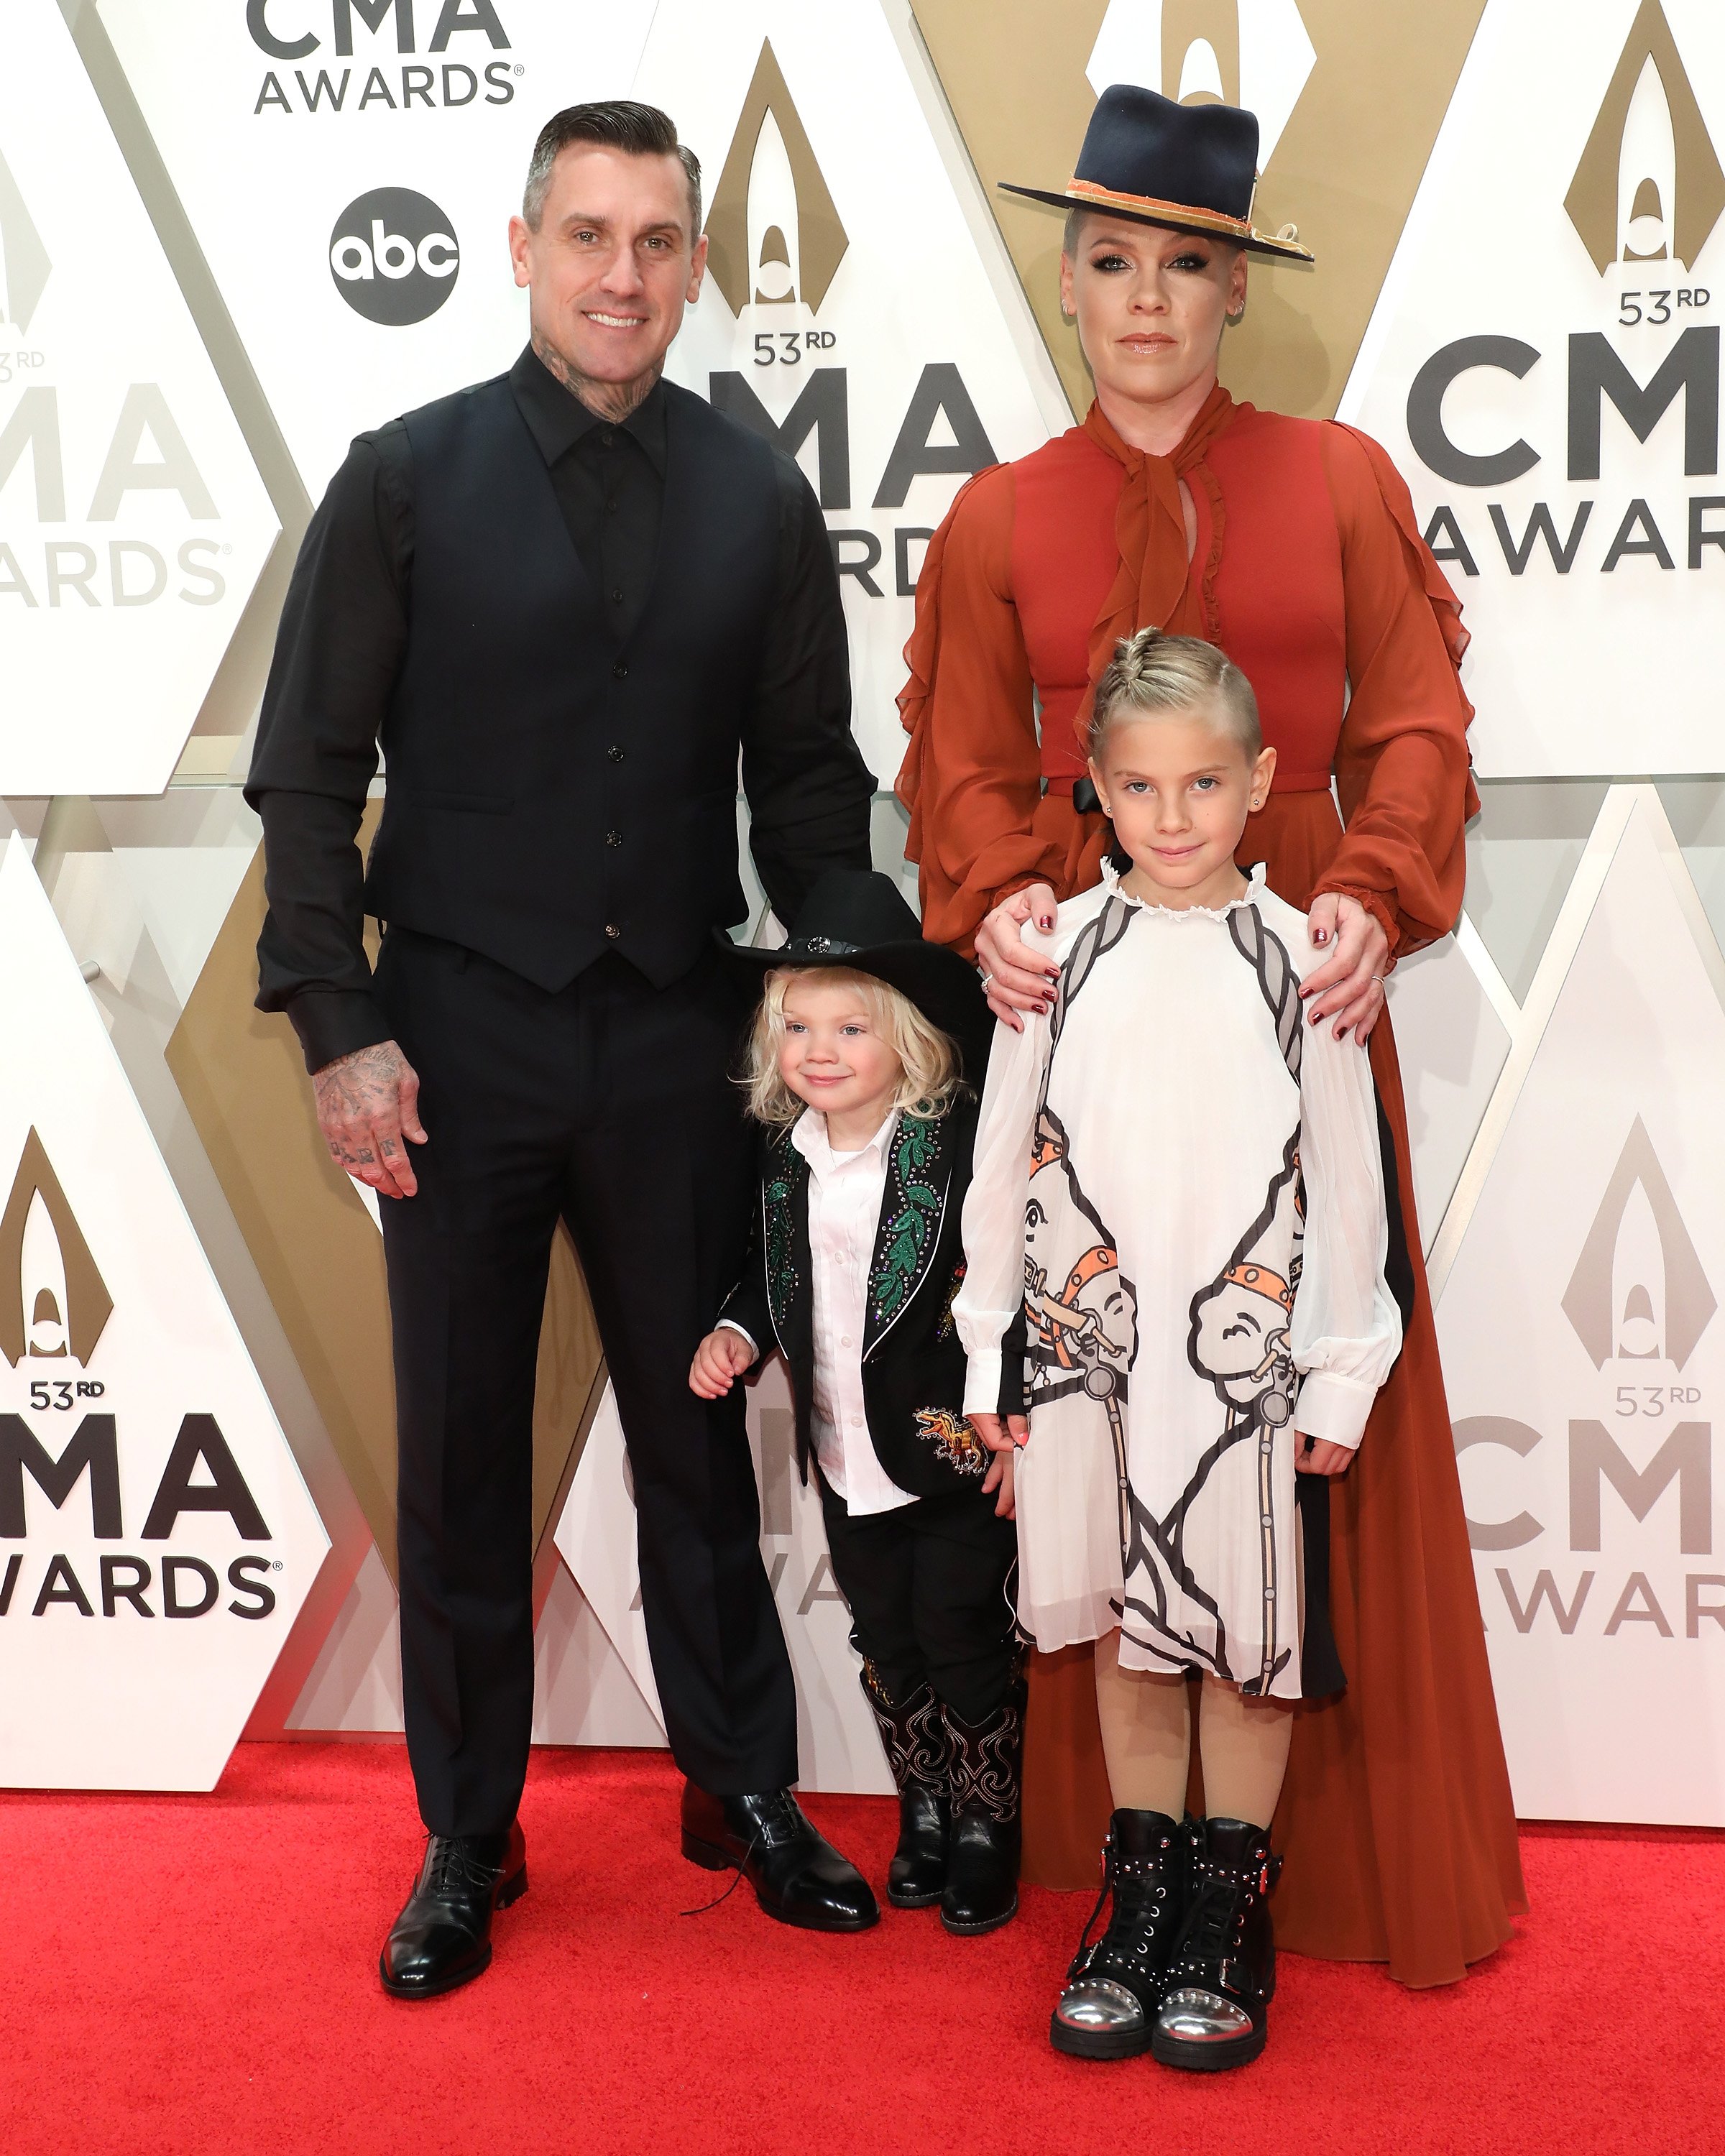 Pink and her husband, Carey Hart attended the CMAs with their daughter, Willow, and son, Jameson, November, 2019. | Photo: Getty Images